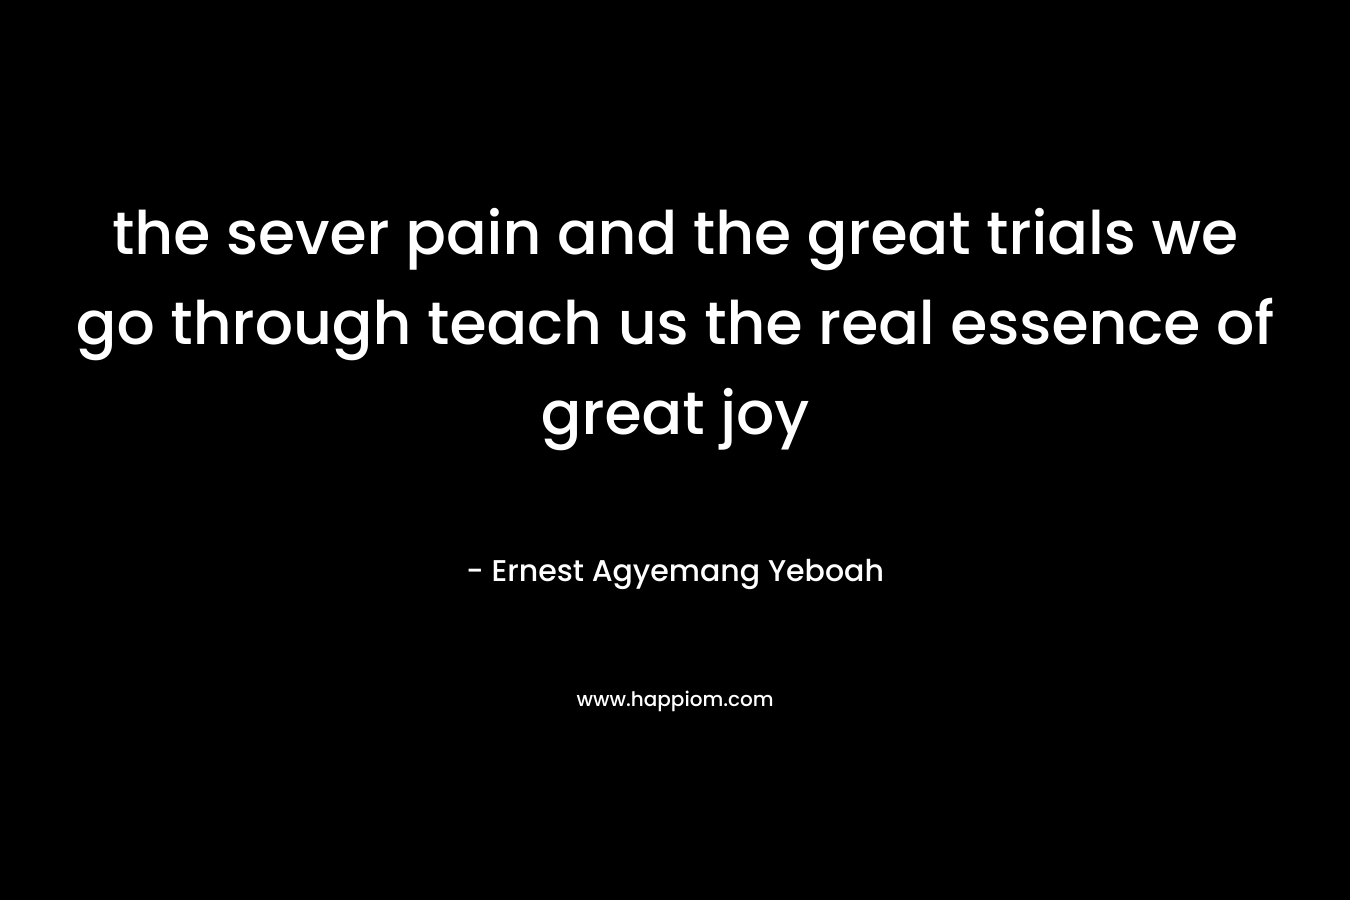 the sever pain and the great trials we go through teach us the real essence of great joy